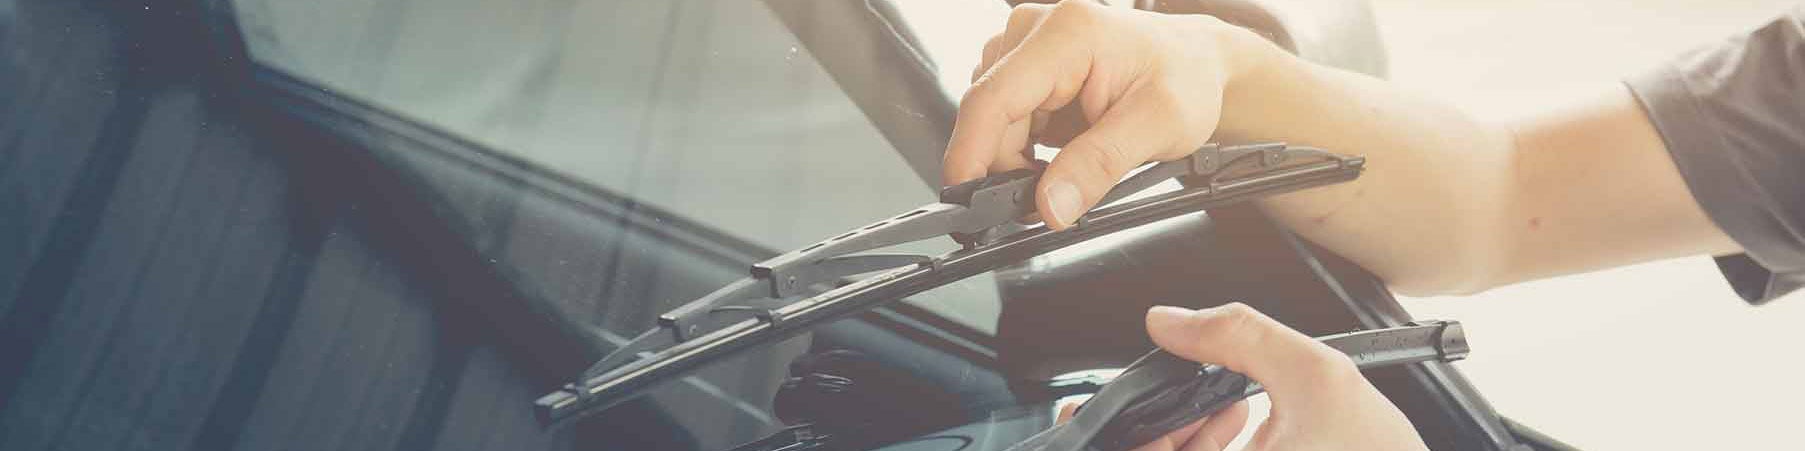 Windshield Wiper Service & Replacement in San Marcos, TX